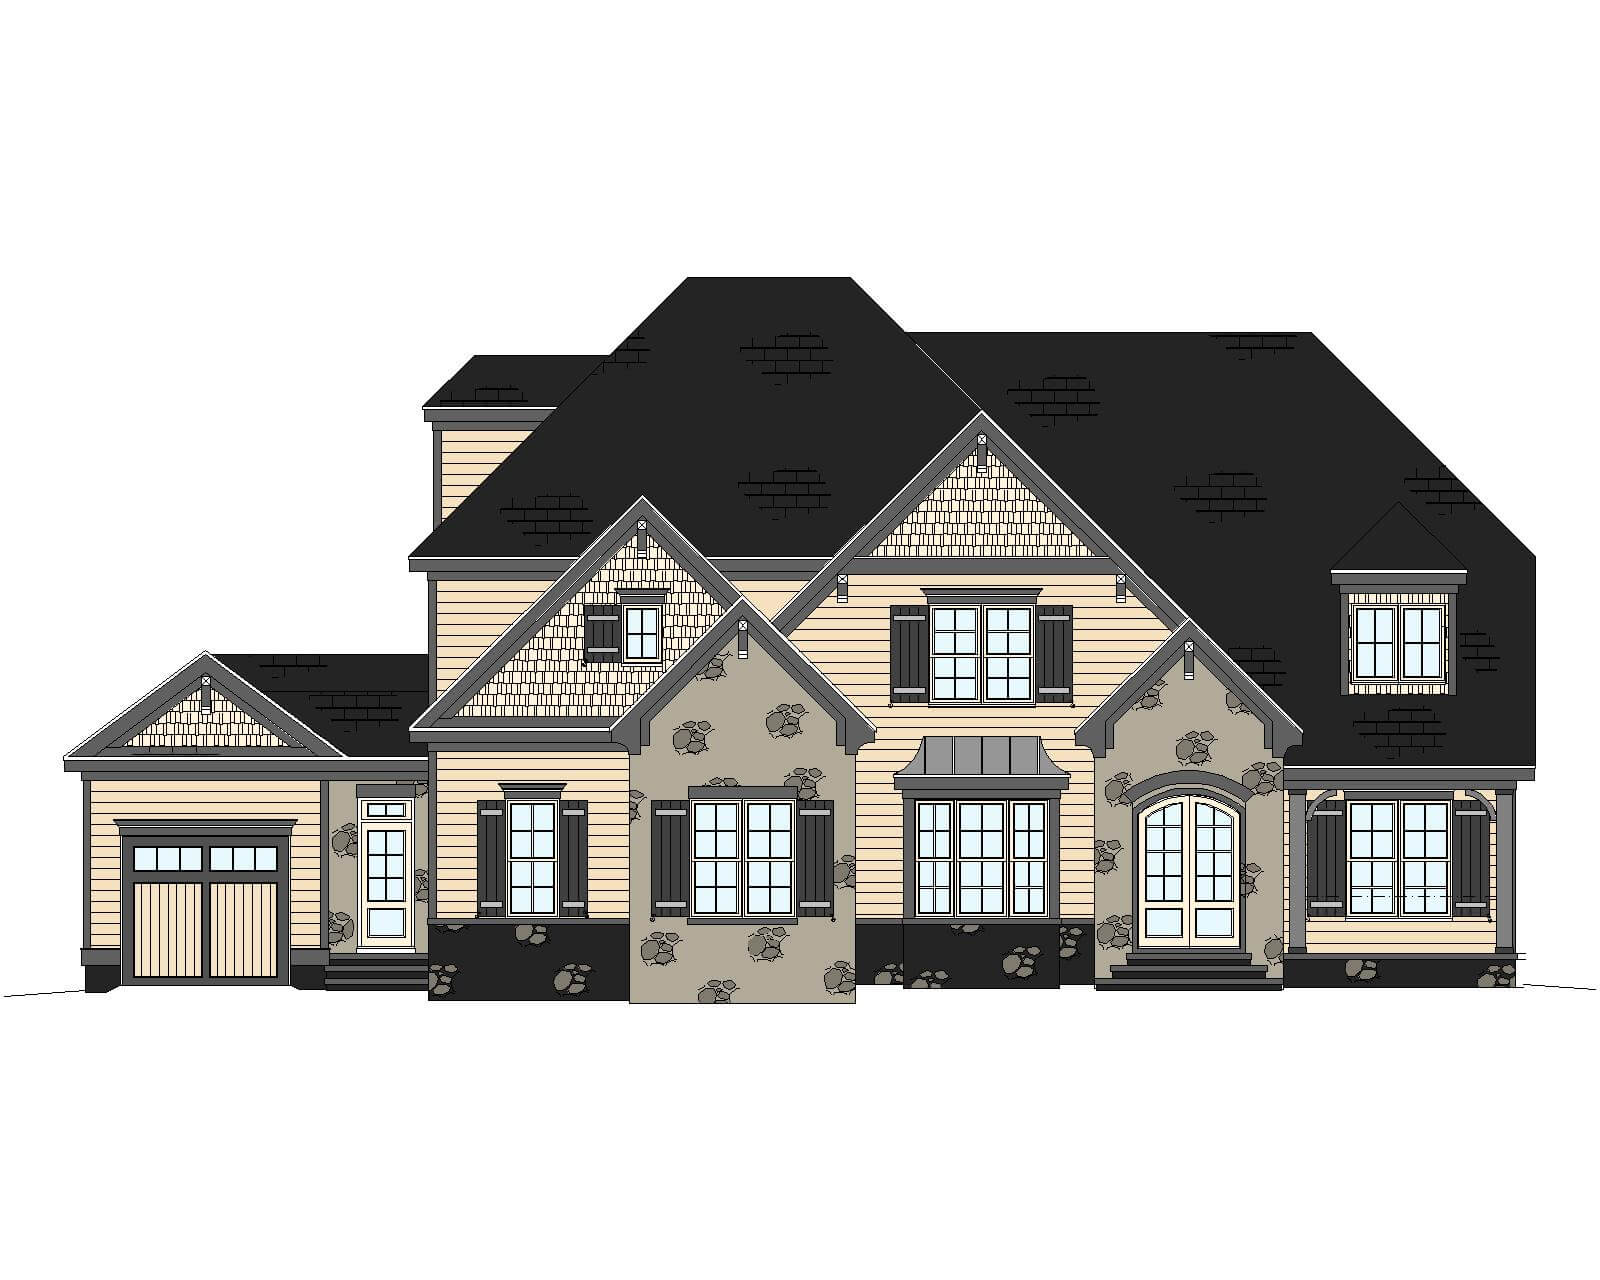 13 1604 My Home Floor Plans Front Elevation 